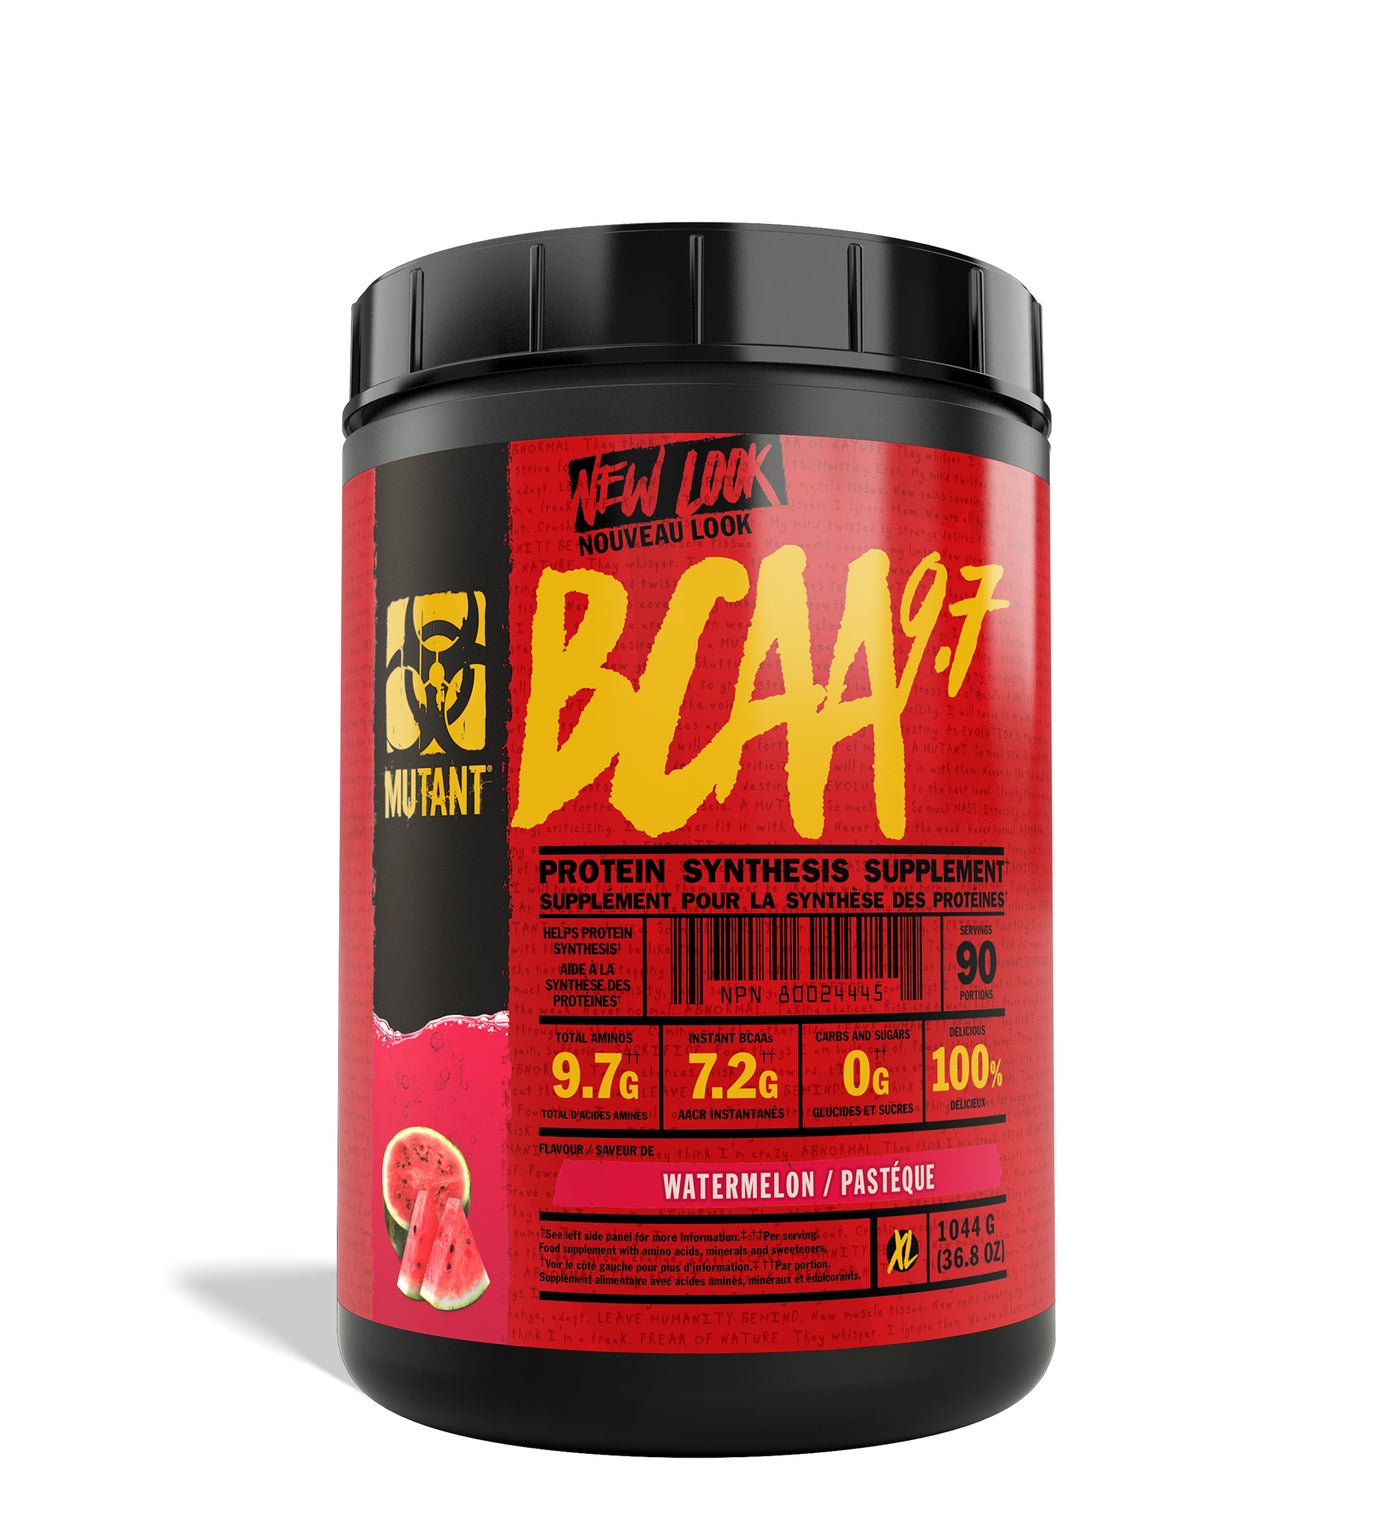 MUTANT BCAA 9.7® (90 Servings) - Sports Drink Mix